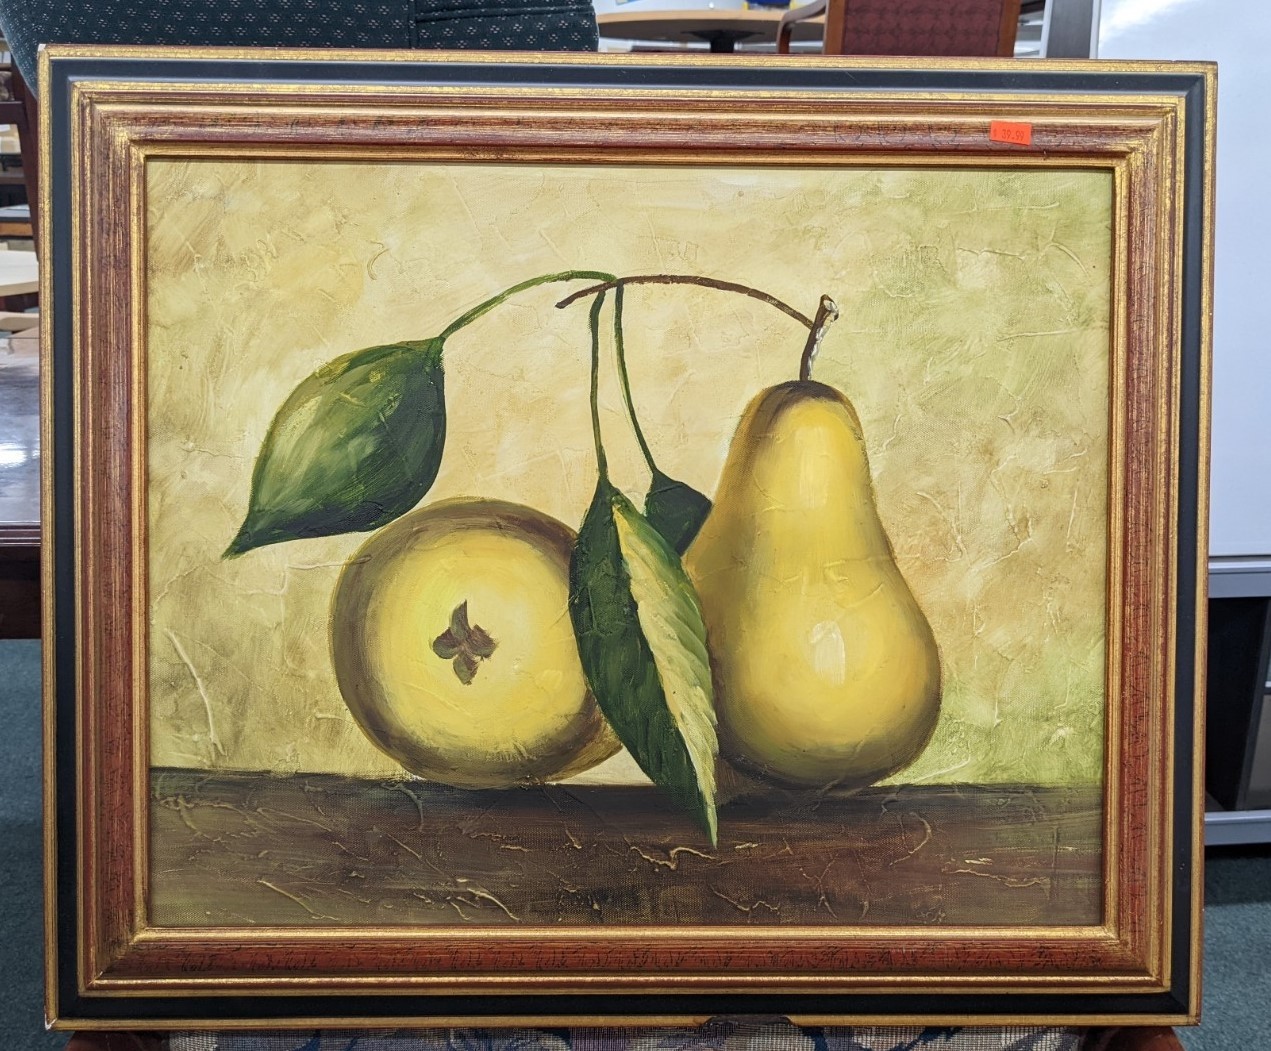 Used Framed Art with Pears on Canvas